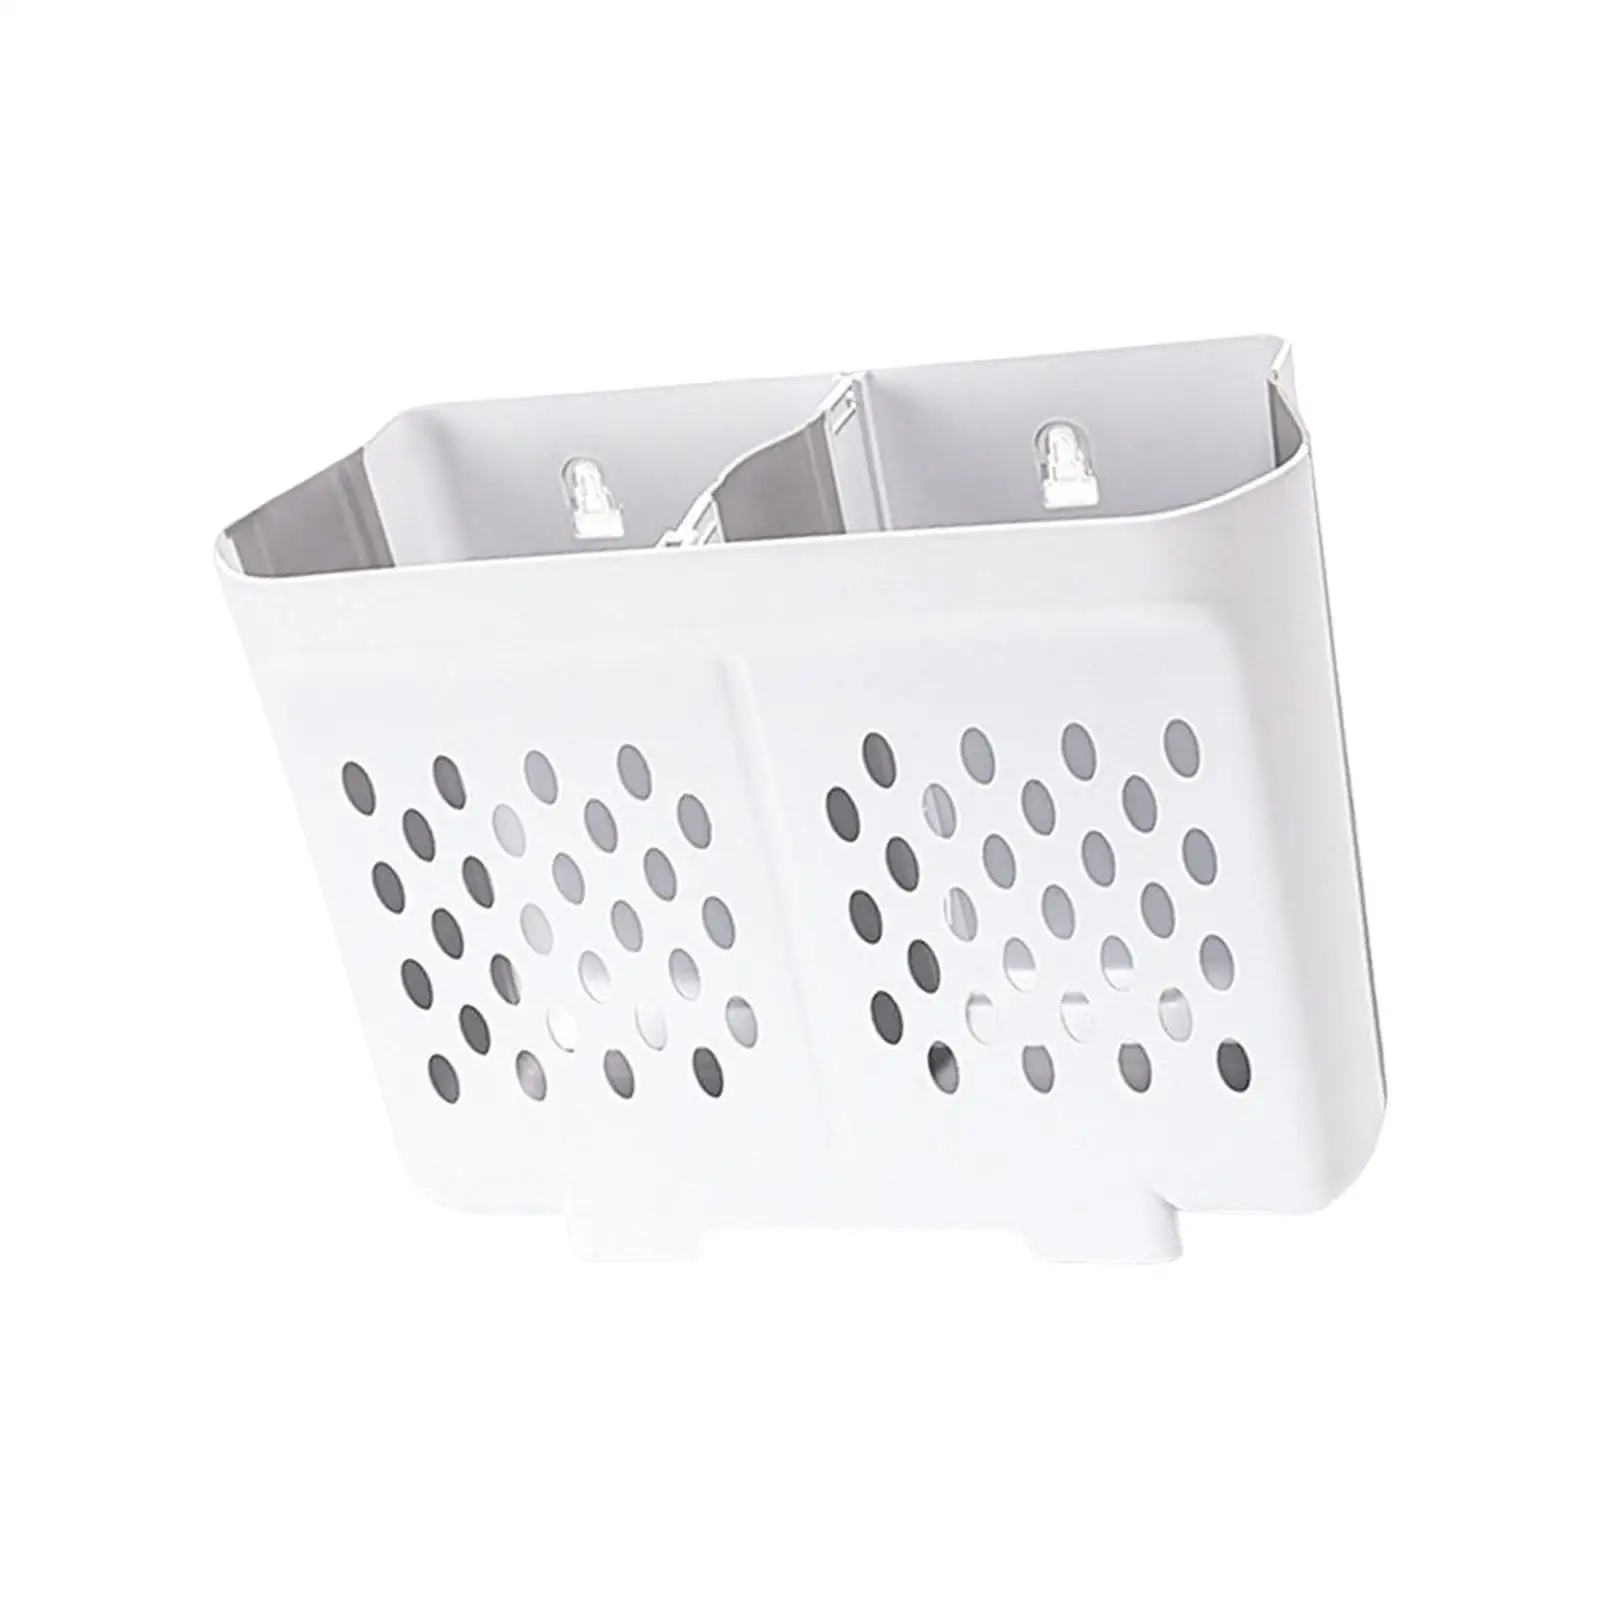 Portable Folding Dirty Clothes Hamper Container Wall Mount Hollow Design Sturdy Punching Free